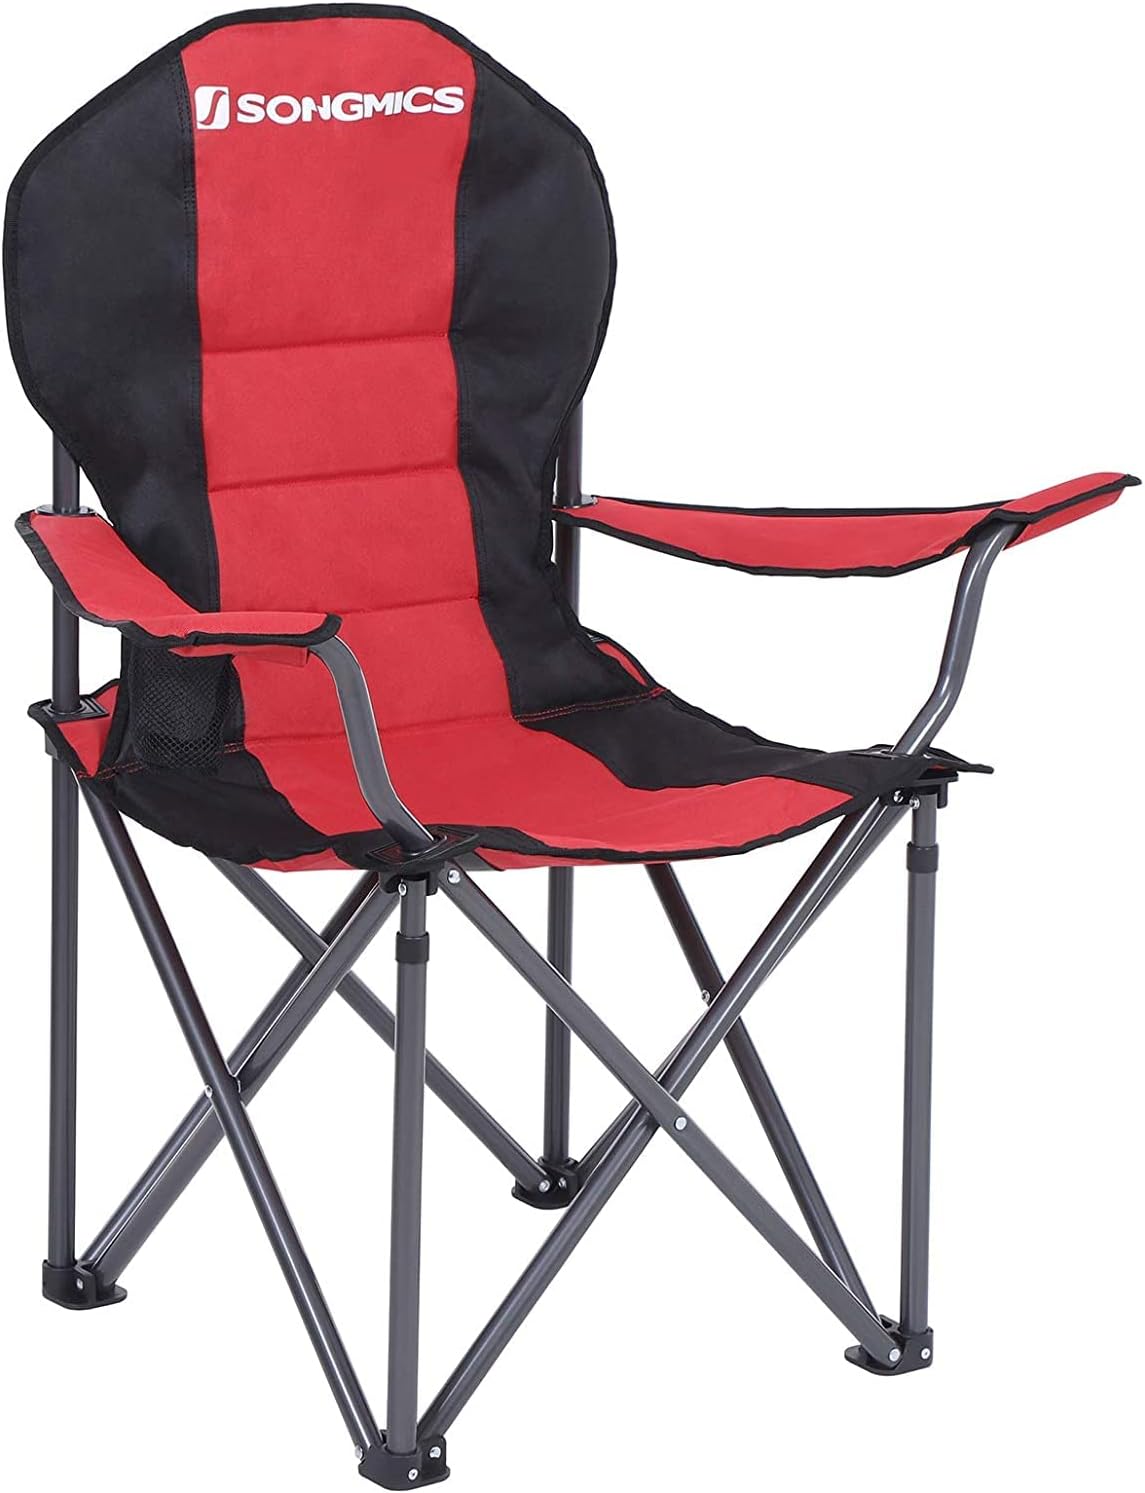 SONGMICS Folding Camping Chair with Bottle Holder Red and Black